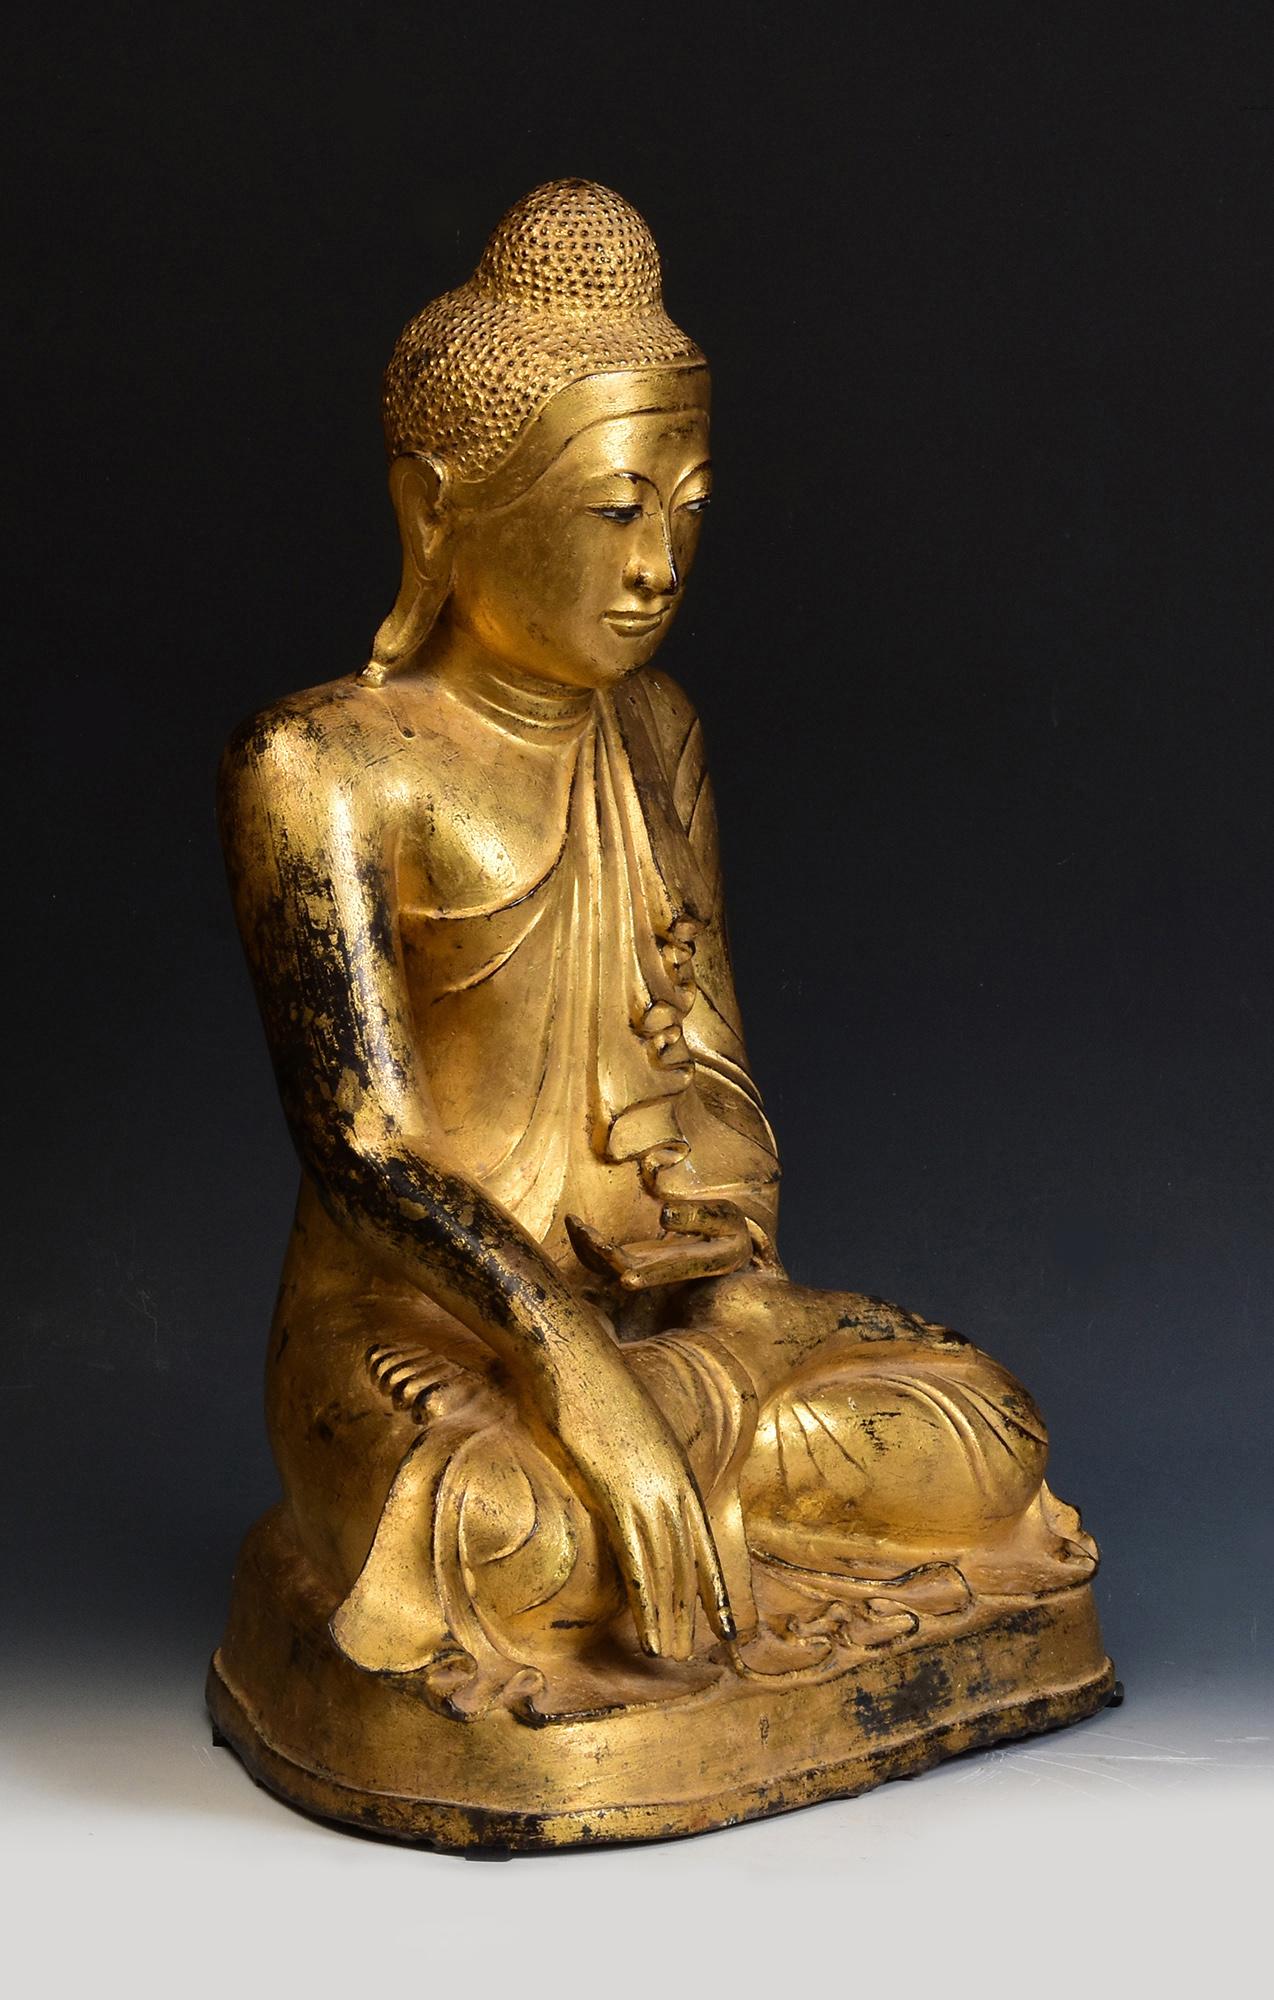 19th Century, Mandalay, Antique Burmese Bronze Seated Buddha with Gilded Gold For Sale 8